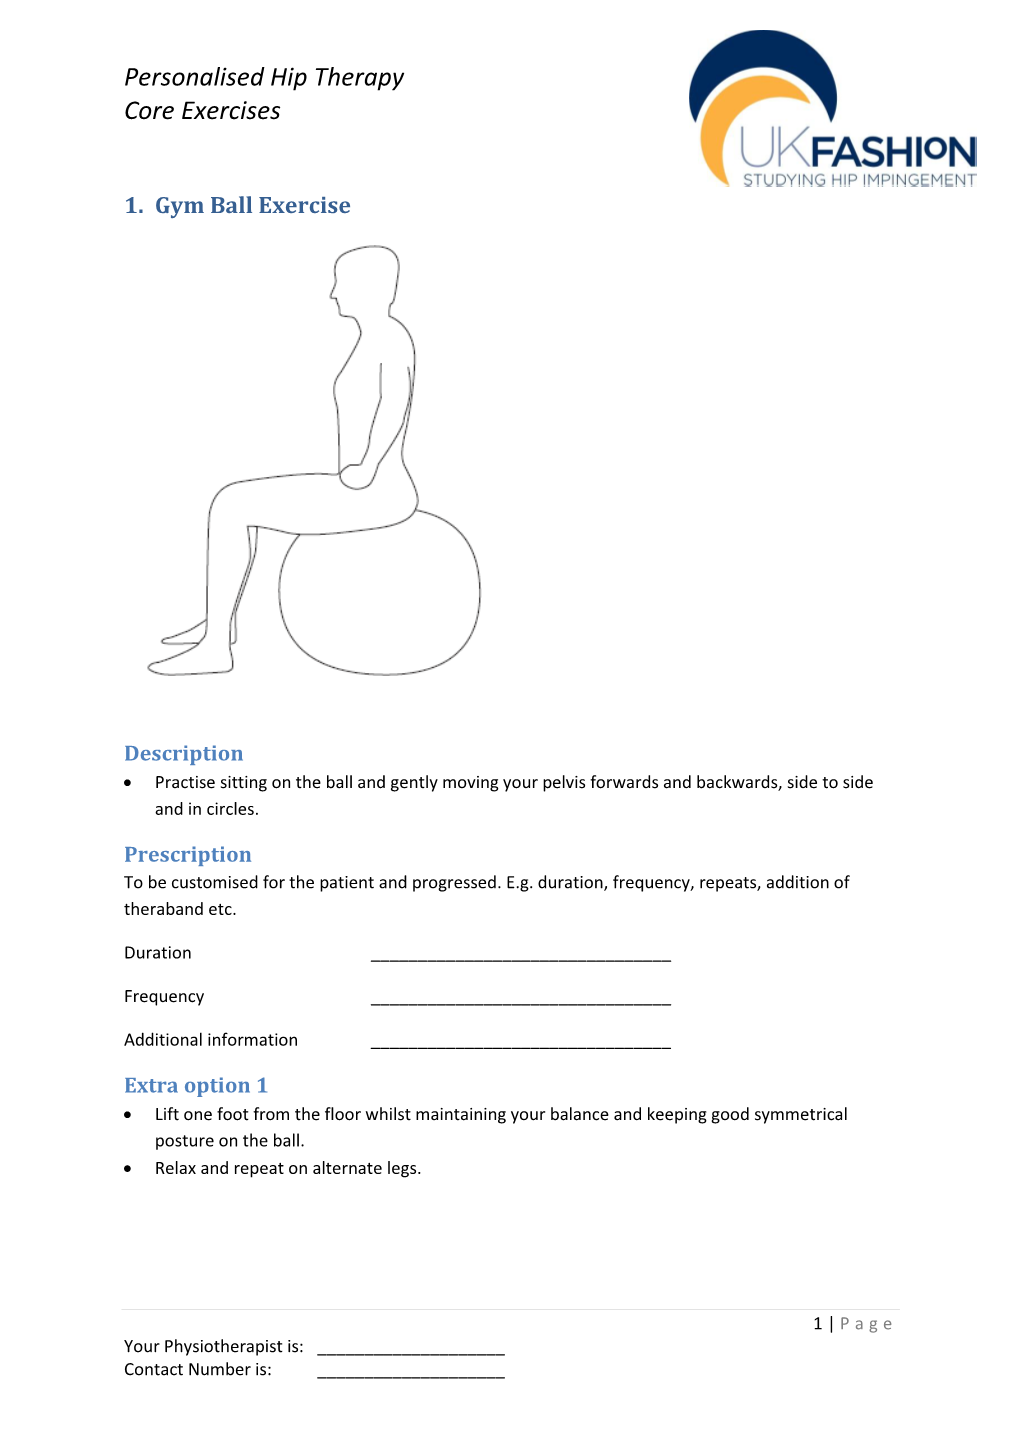 Personalised Hip Therapy Core Exercises